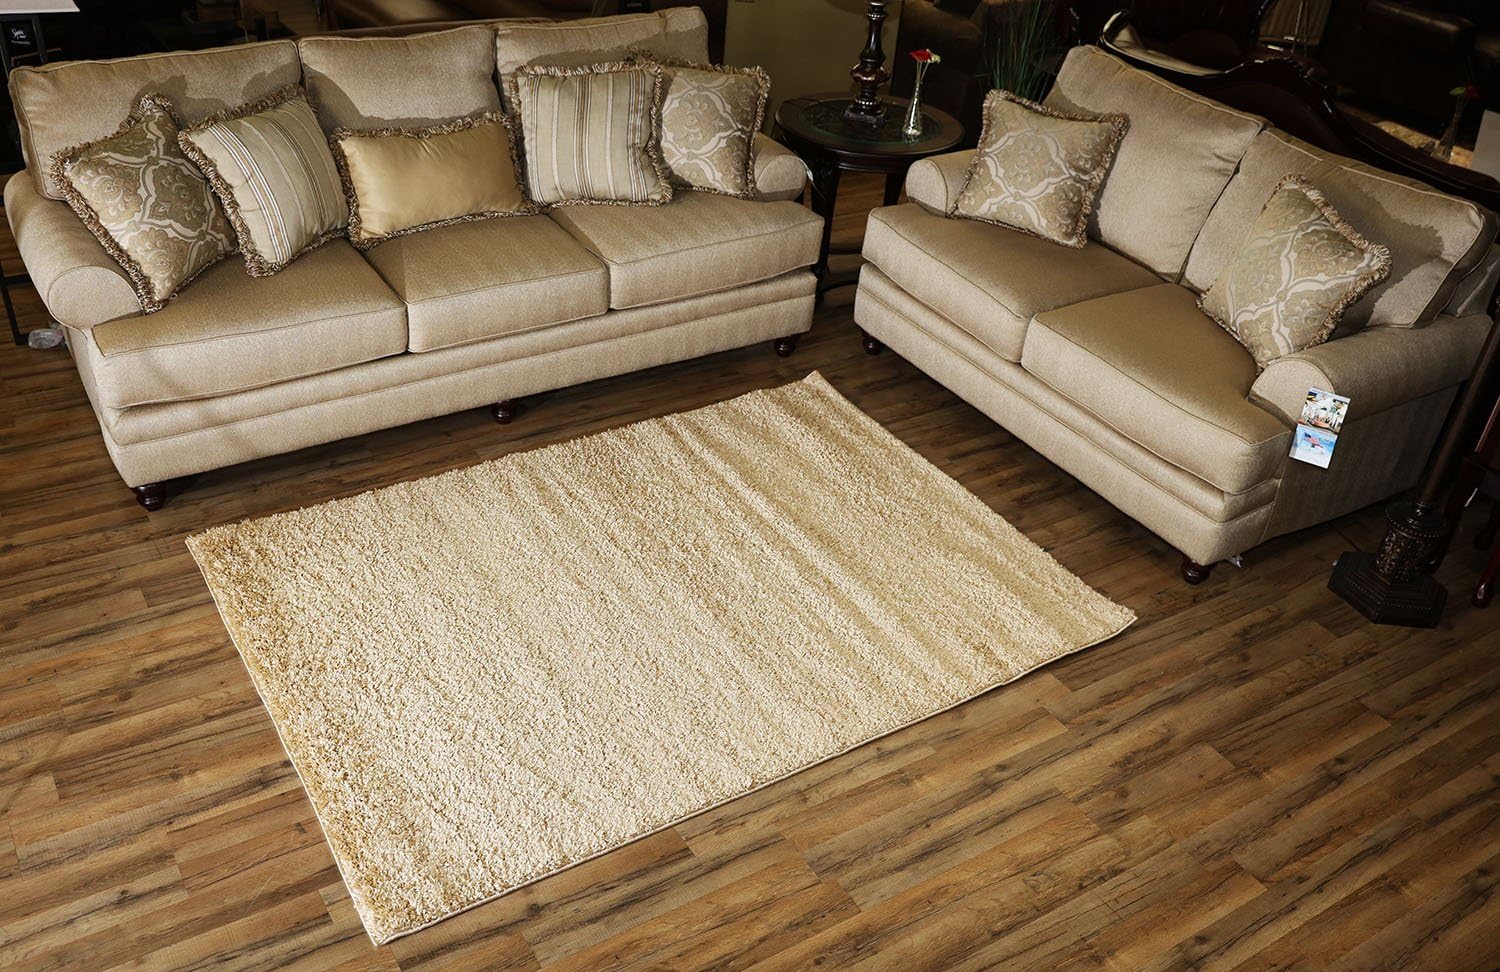 SOHO Shaggy Collection Solid Color Shag Area Rug (Beige, 5 x 7) - 0